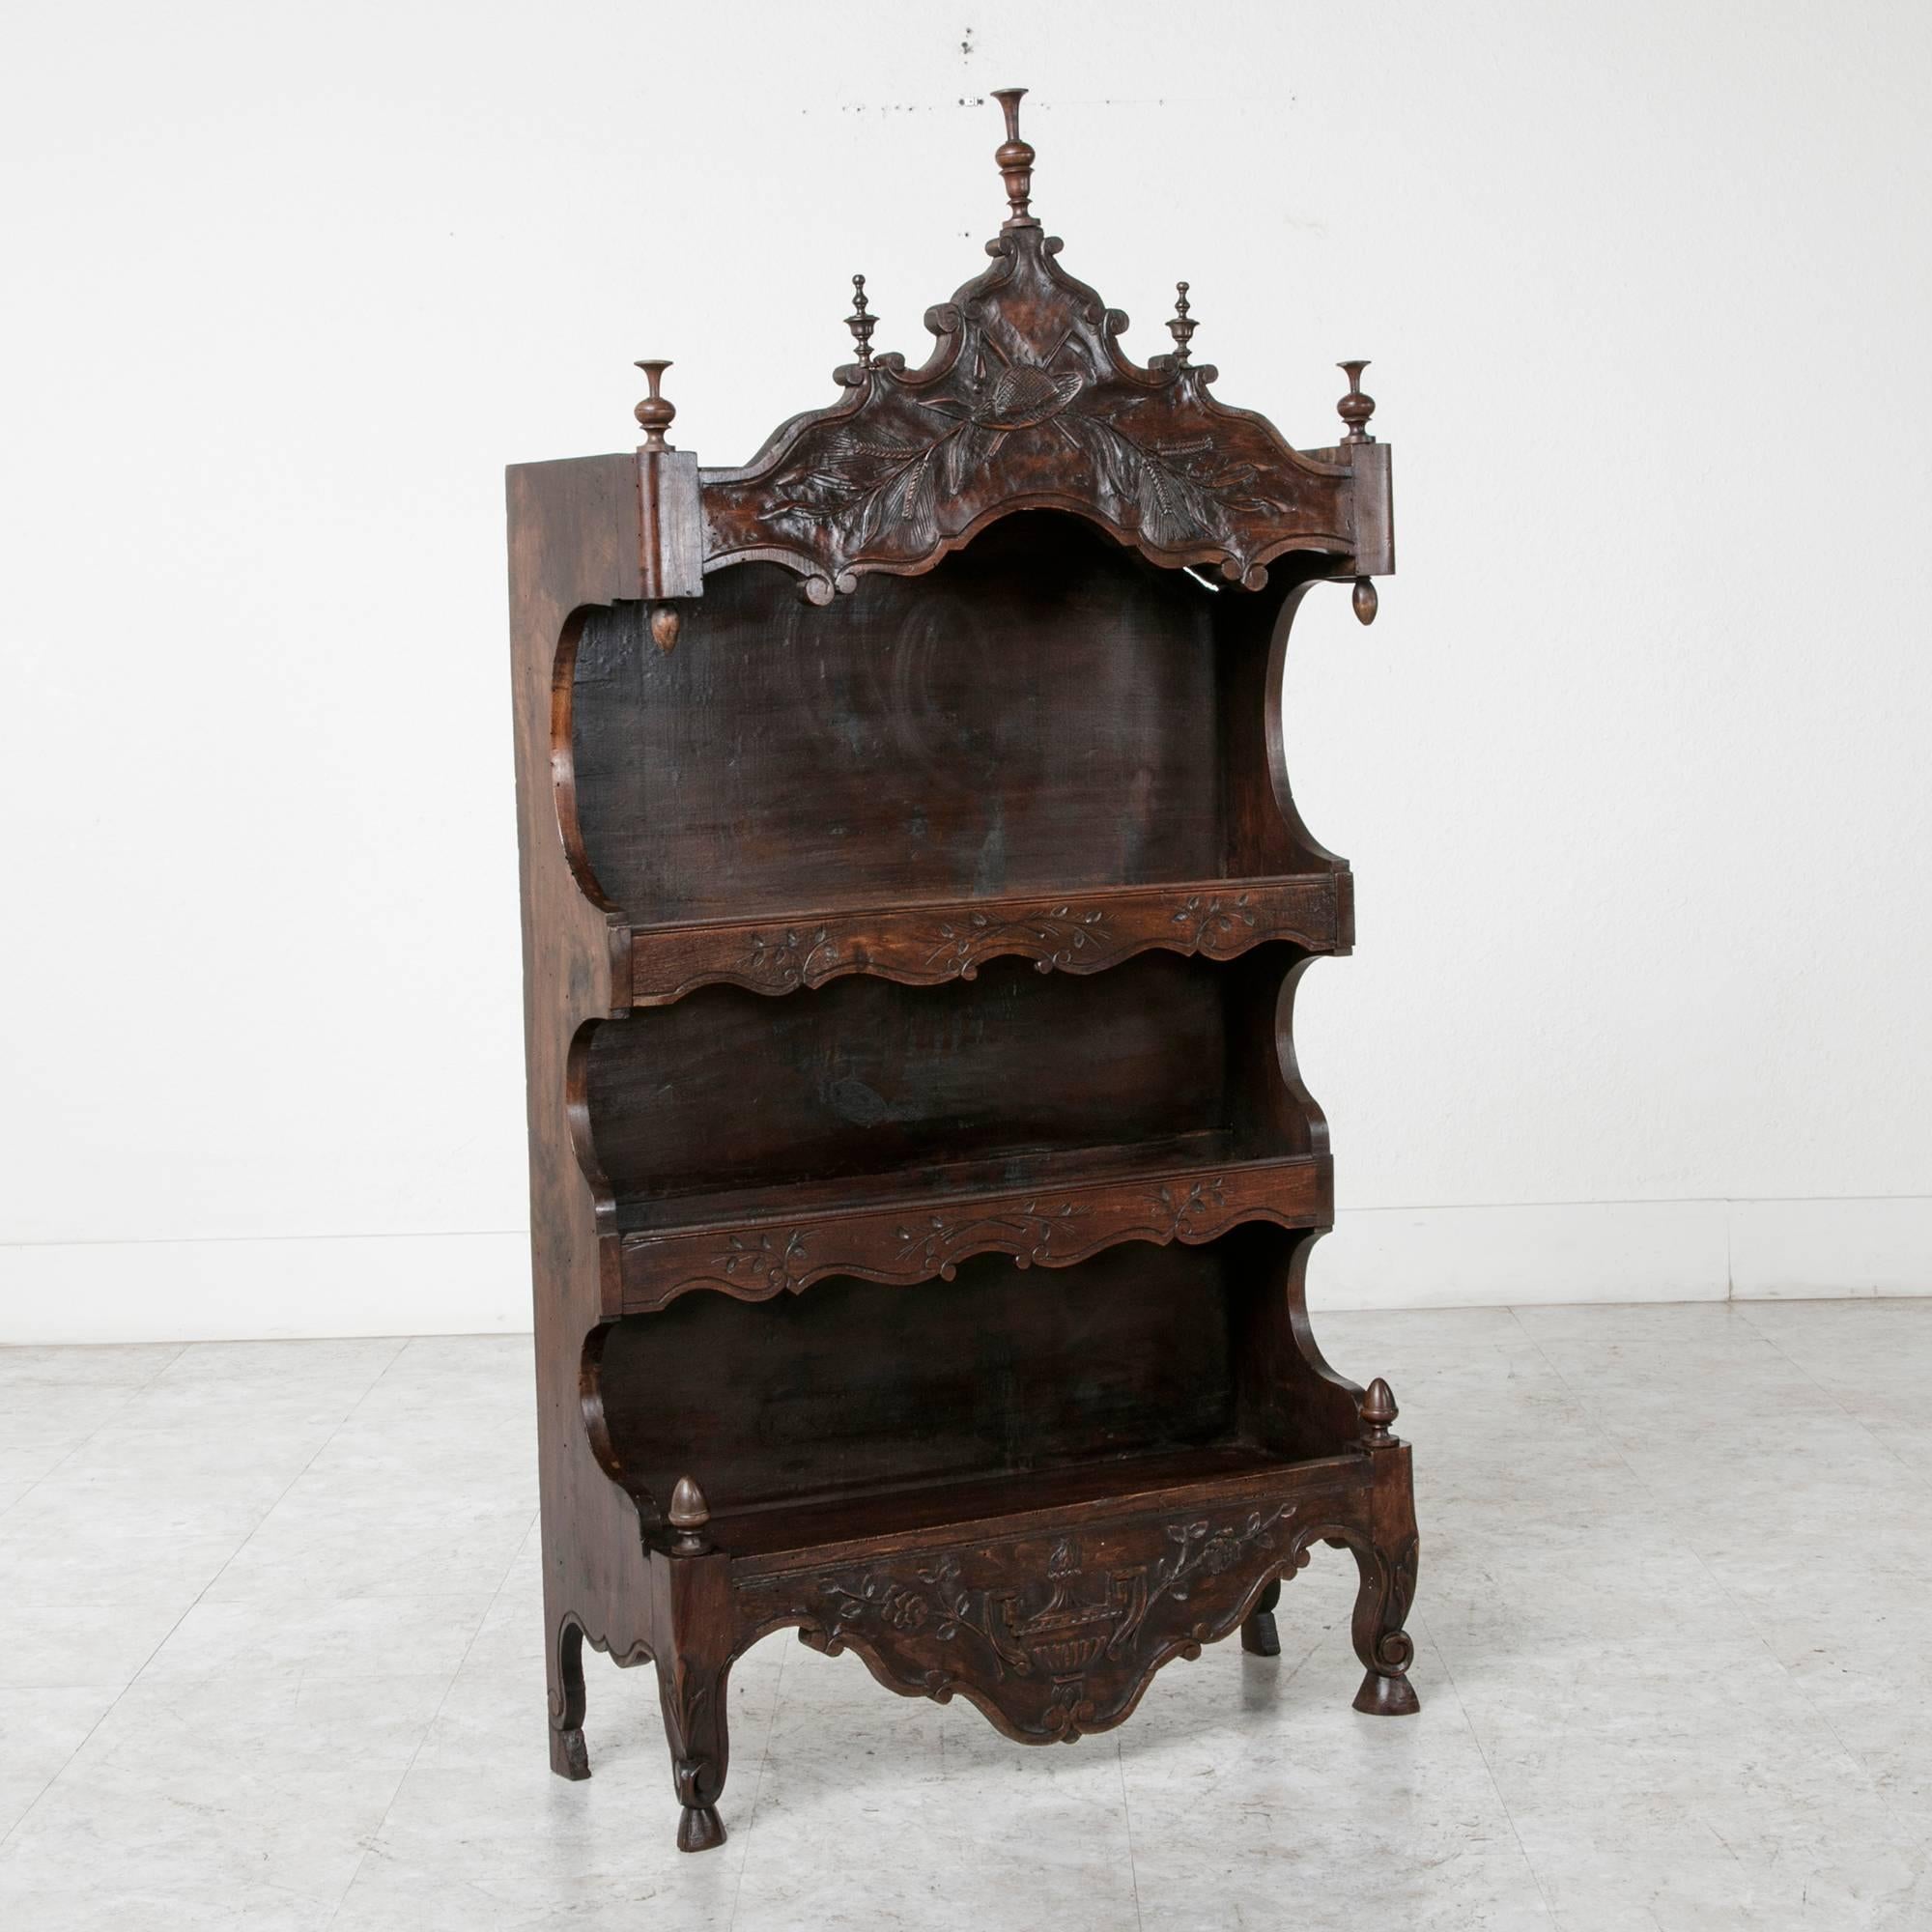 This early 20th century hand-carved walnut estagnie or etagere features carvings depicting a garden hat, garden tools, and shocks of wheat. From Provence in Southern France, its lower apron features the regional symbol of the Provençal soup tureen.